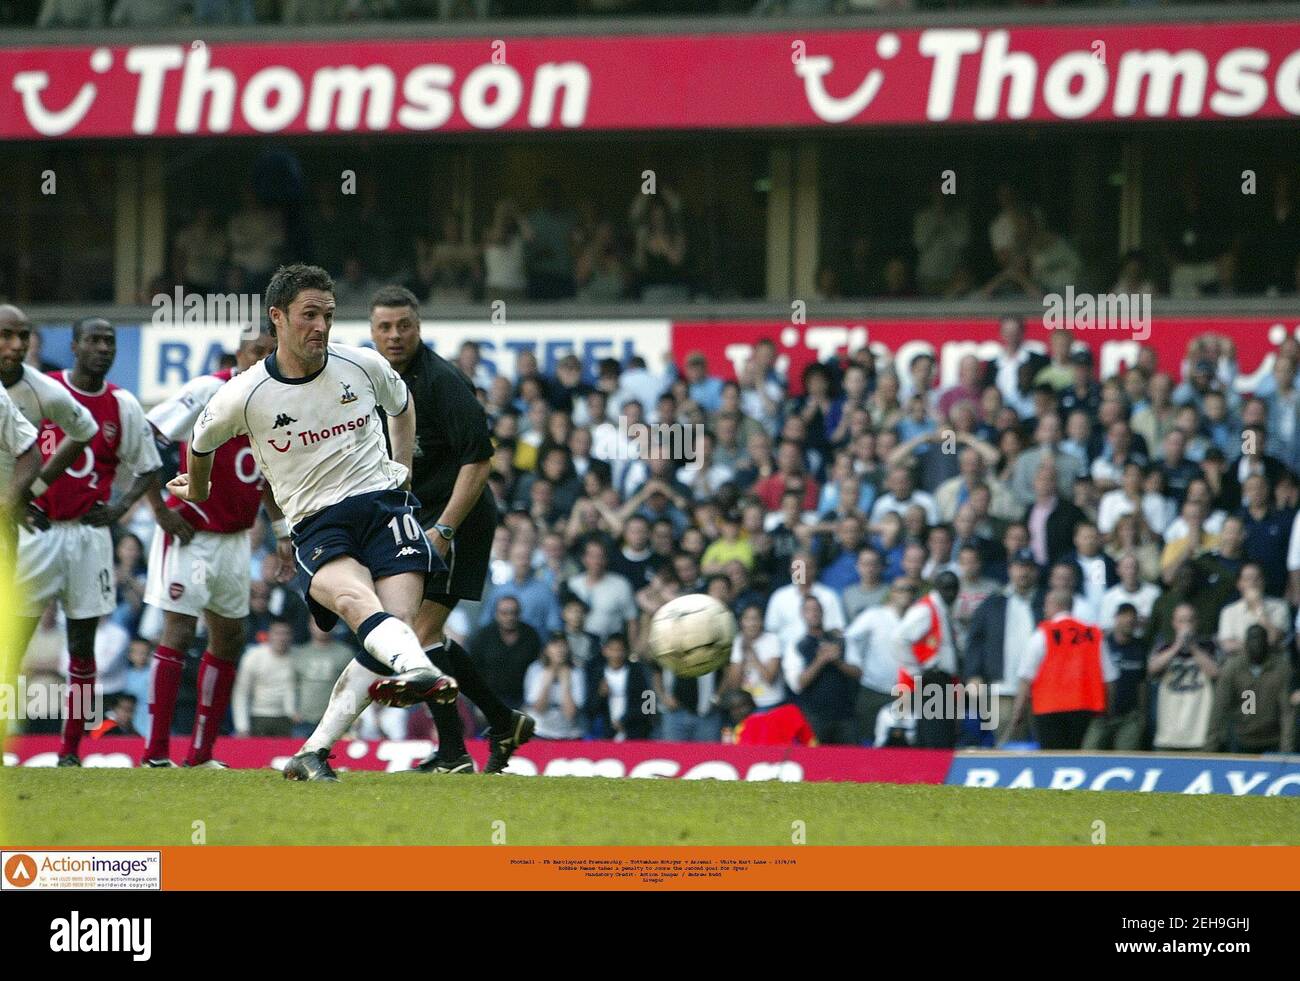 Football - FA Barclaycard Premiership - Tottenham Hotspur v Arsenal - White Hart Lane - 25/4/04  Robbie Keane takes a penalty to score the second goal for Spurs   Mandatory Credit: Action Images / Andrew Budd  Livepic Stock Photo